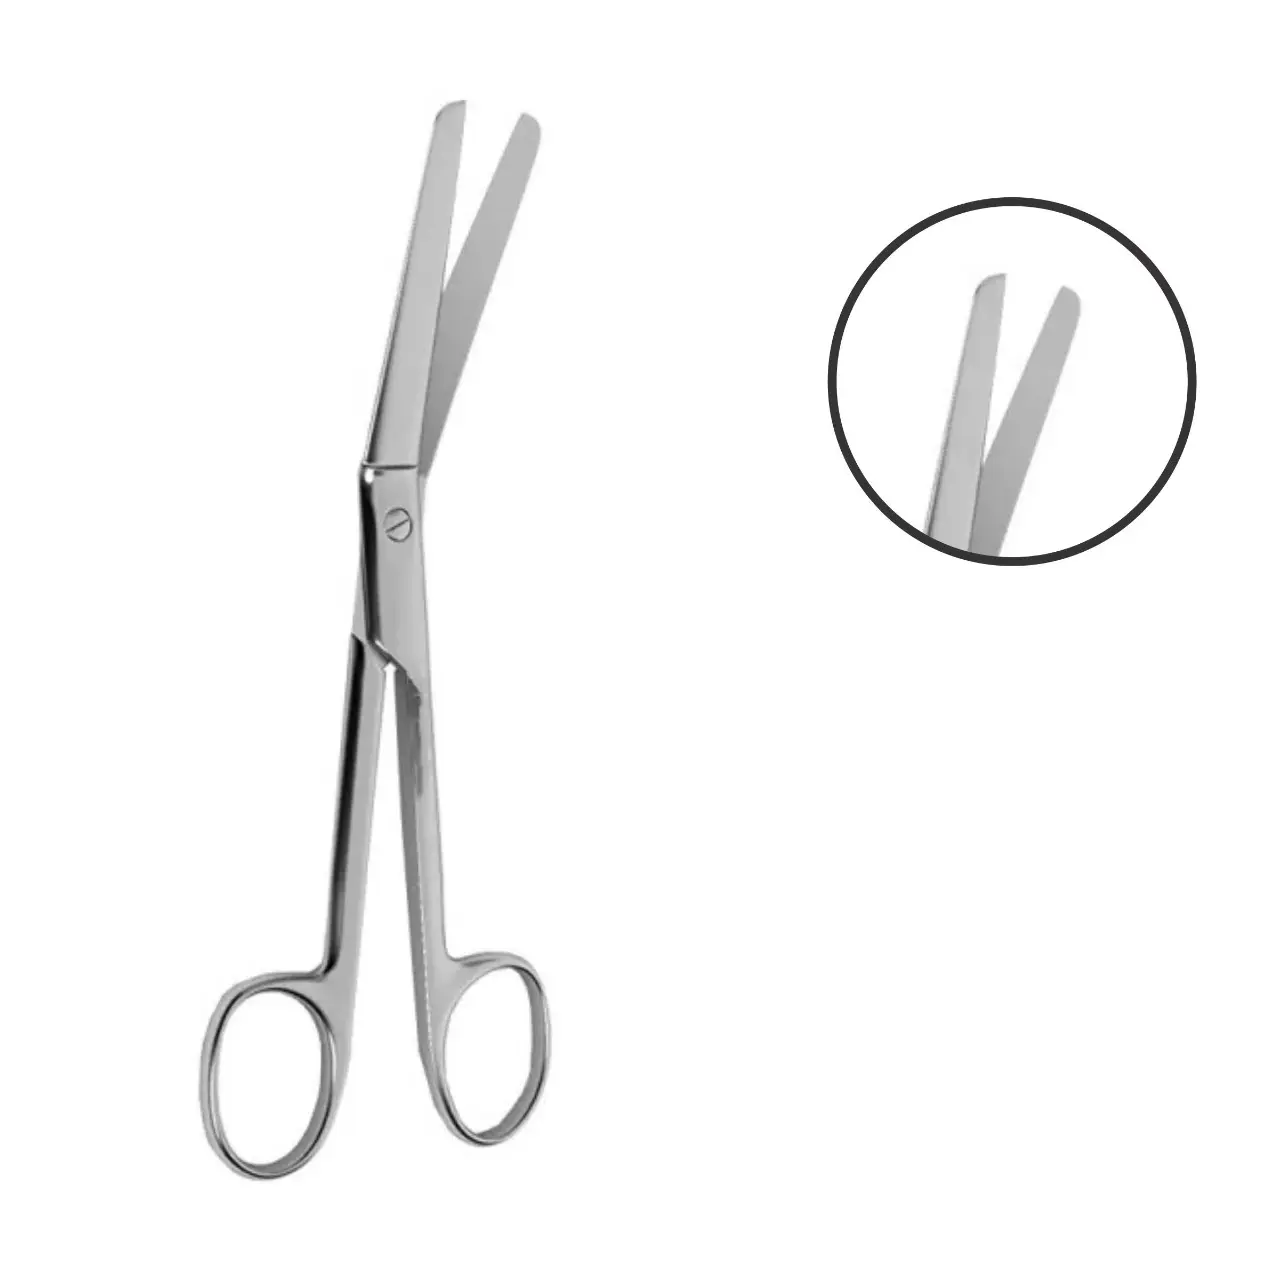 Wholesale Ferguson Operating and Suture Scissors Angled Blunted blades Handles German Stainless Steel Medical Instruments